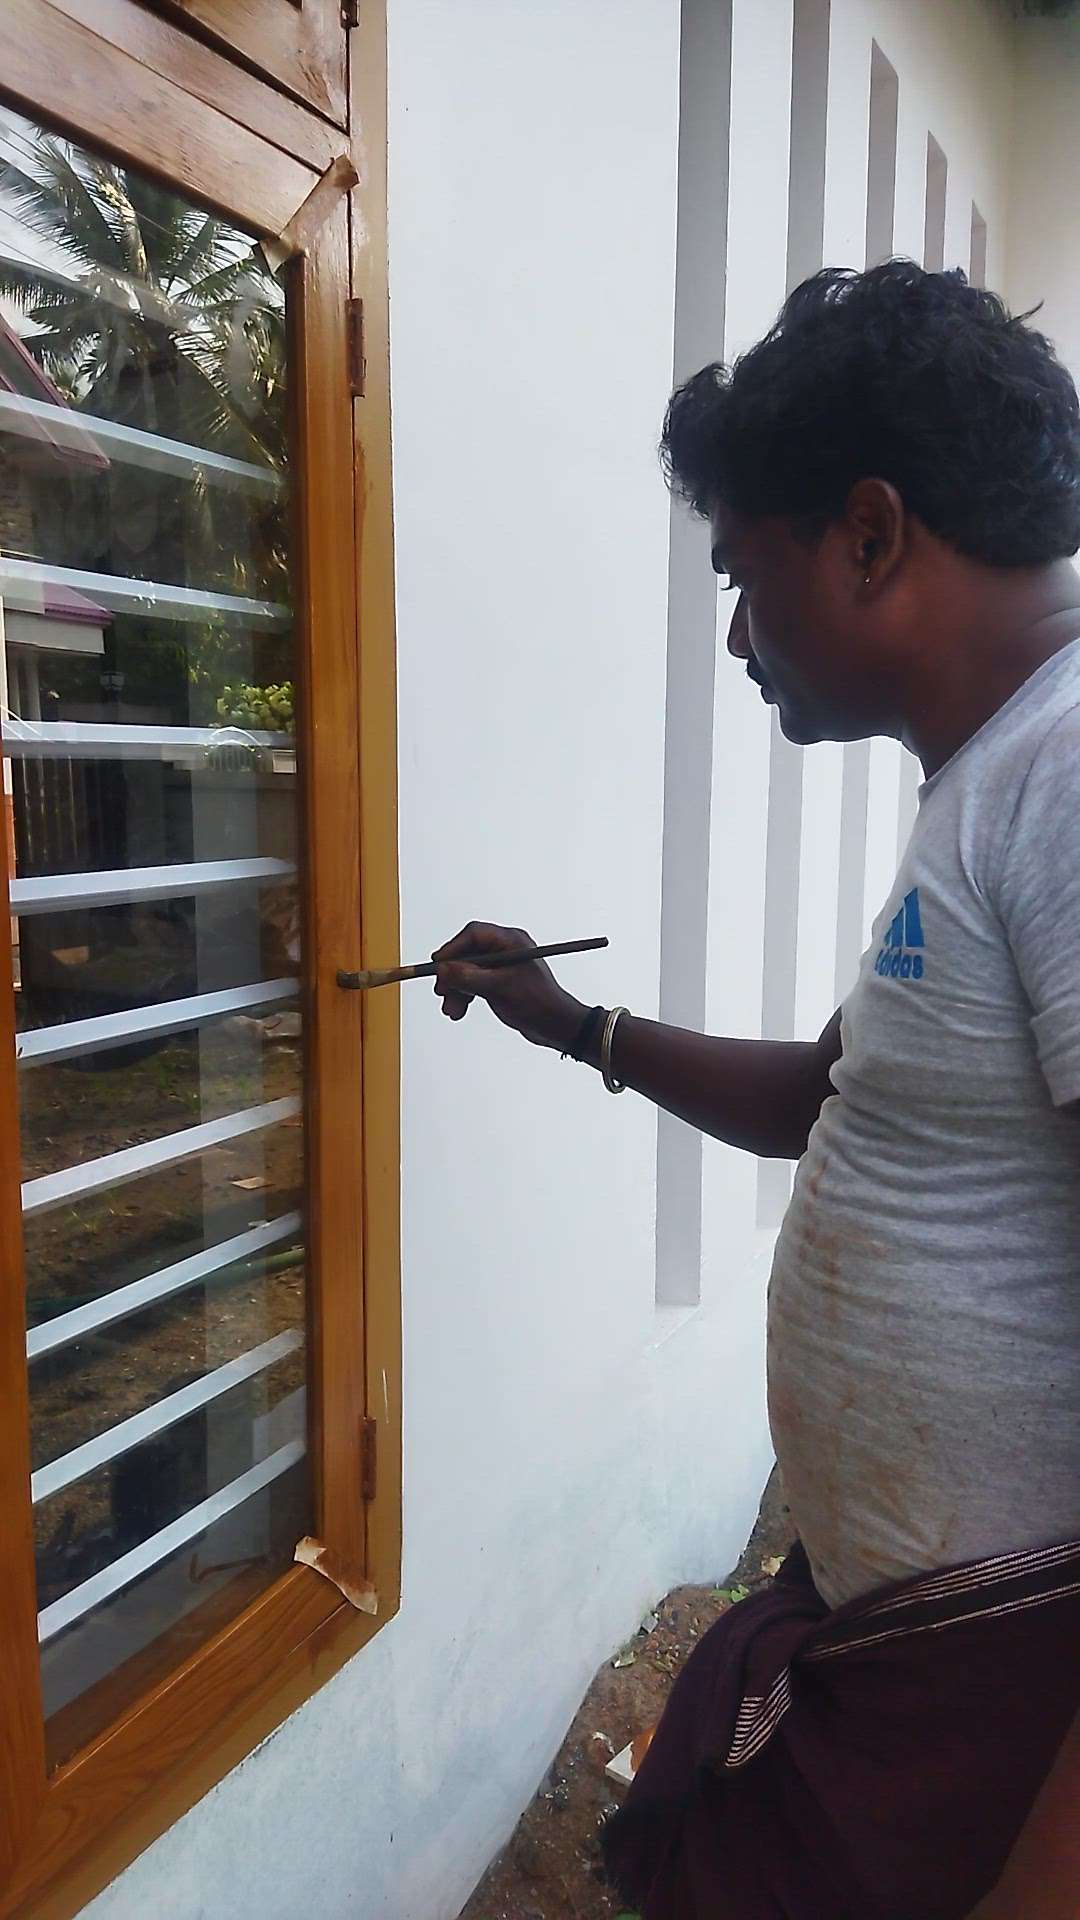 work in progress....
METAL WINDOW, CHANGES TO WOOD FINISH 
Mundur Thrissur...

8156964629


for contact us 8156964629